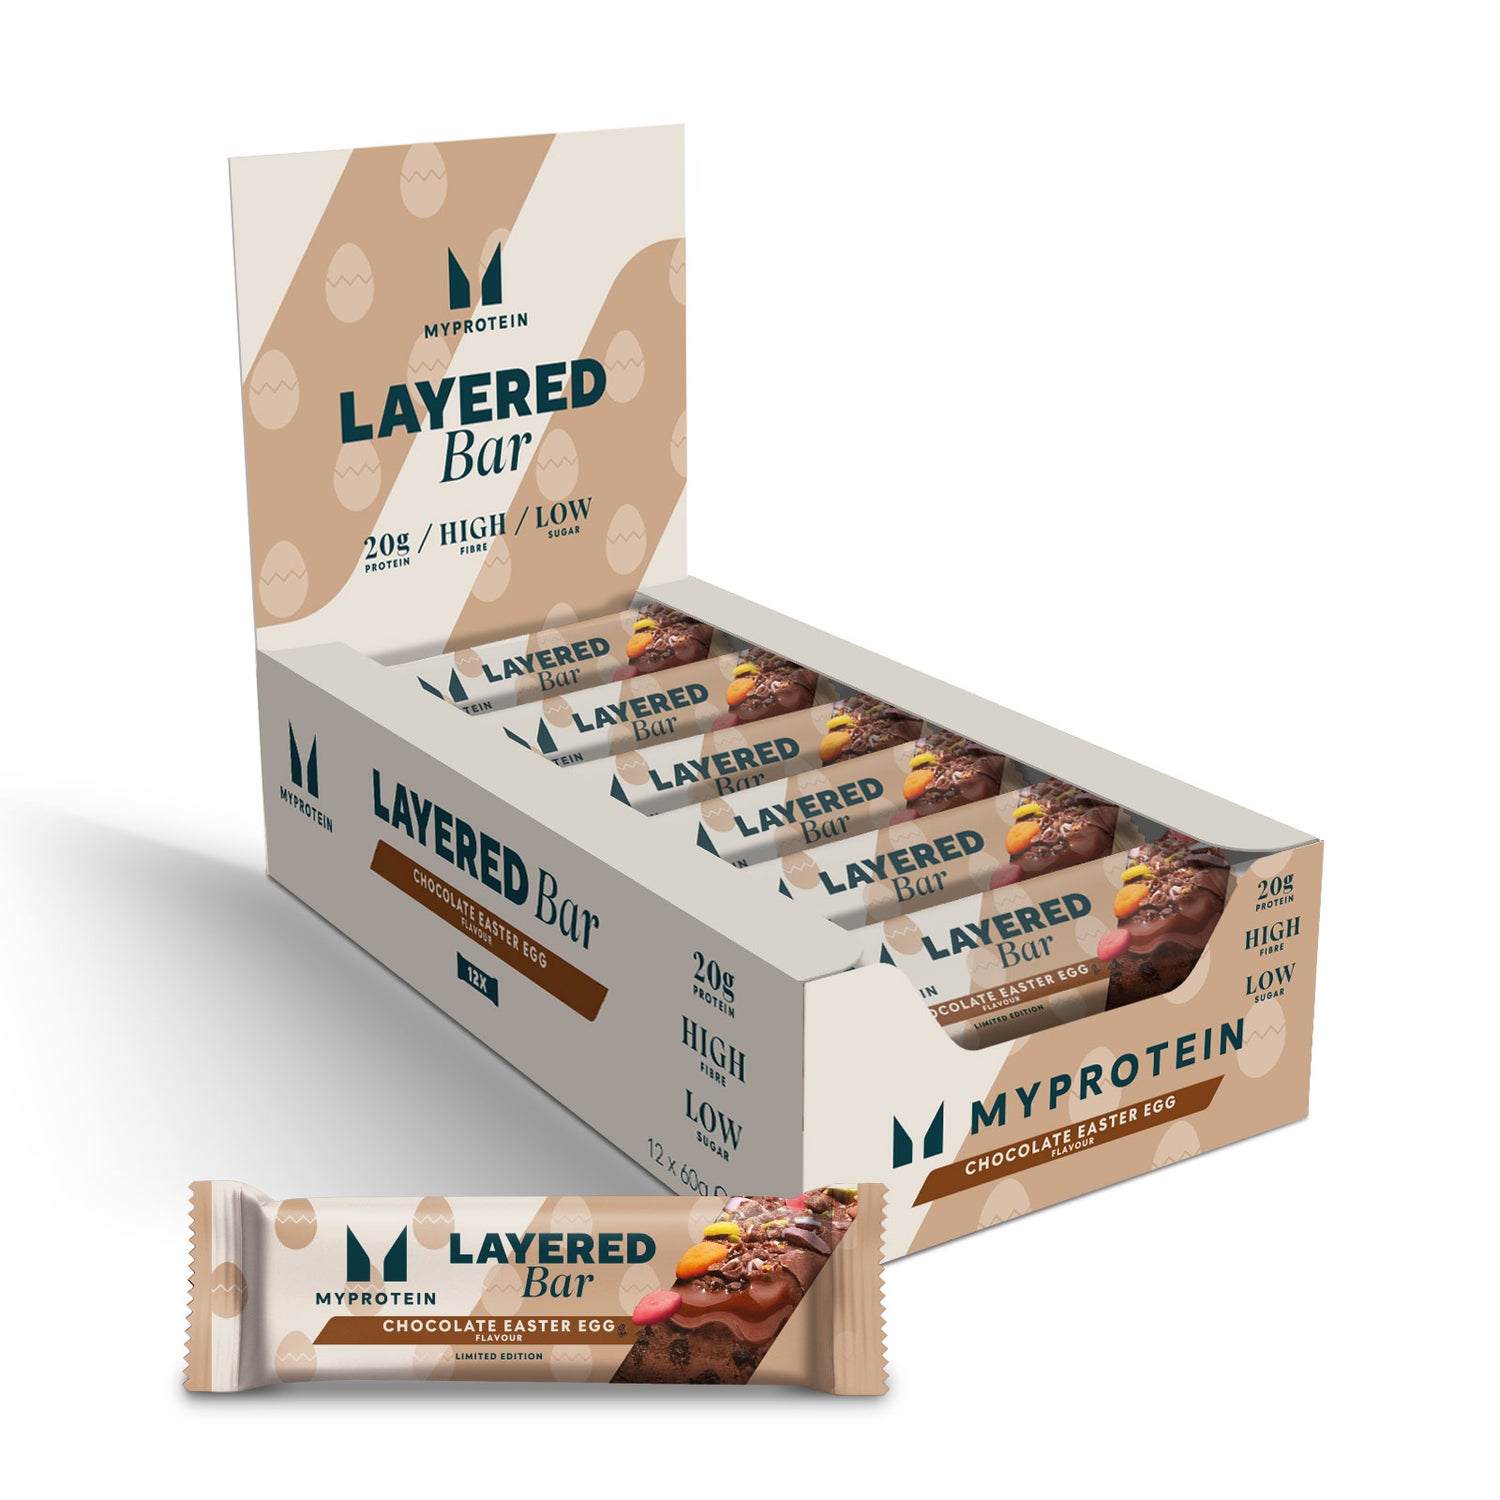 Layered Protein Bar - 12 x 60g - Limited Edition - Milk Choc Easter Egg